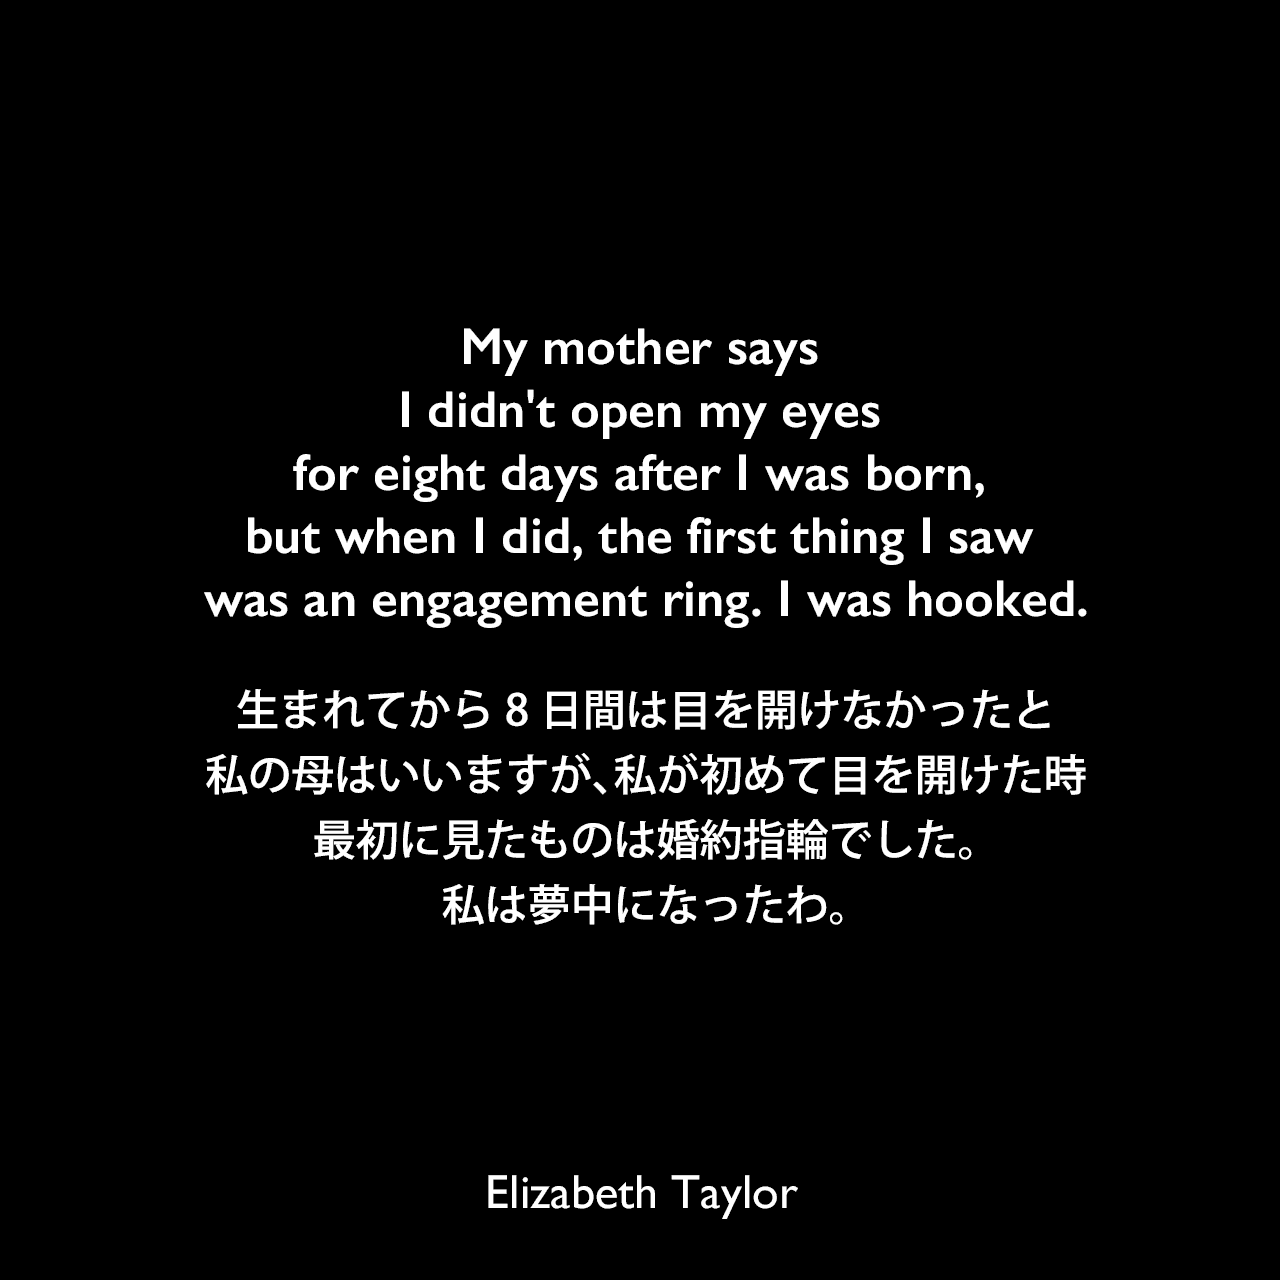 My mother says I didn't open my eyes for eight days after I was born, but when I did, the first thing I saw was an engagement ring. I was hooked.生まれてから8日間は目を開けなかったと私の母はいいますが、私が初めて目を開けた時、最初に見たものは婚約指輪でした。私は夢中になったわ。Elizabeth Taylor